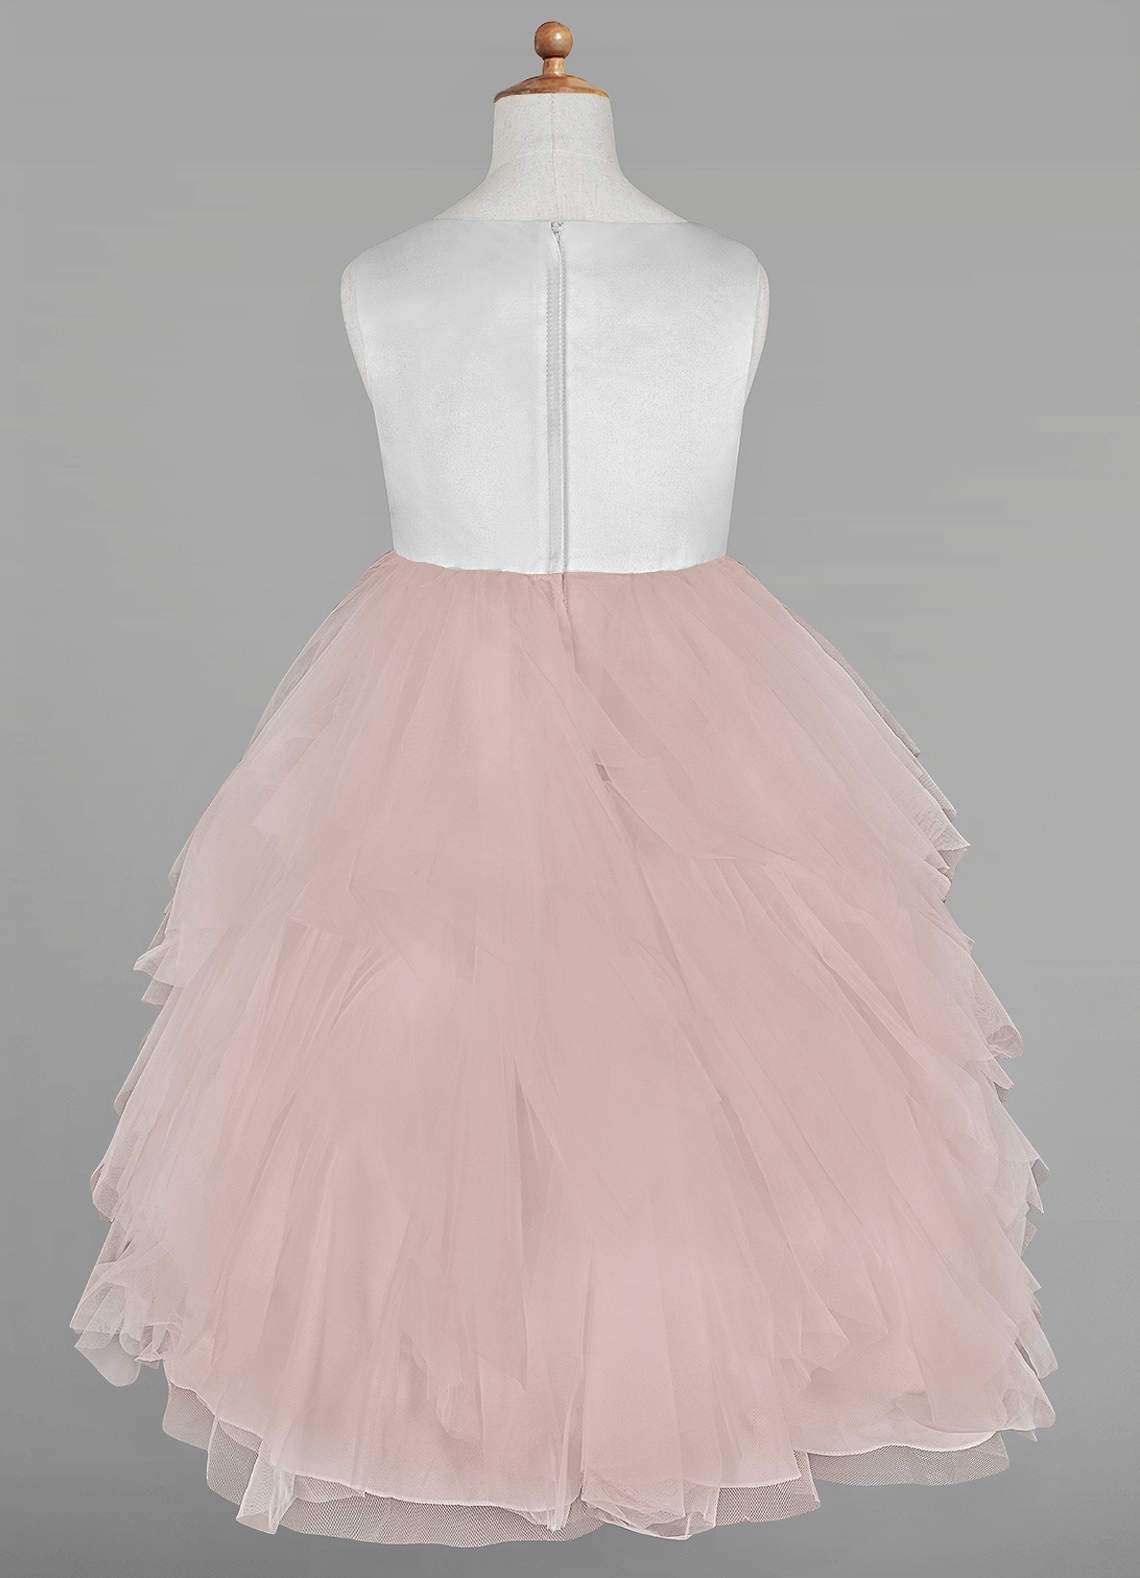 Azazie Redondo Flower Girl Dresses Ball-Gown Embroidered Tulle Knee-Length Dress image1